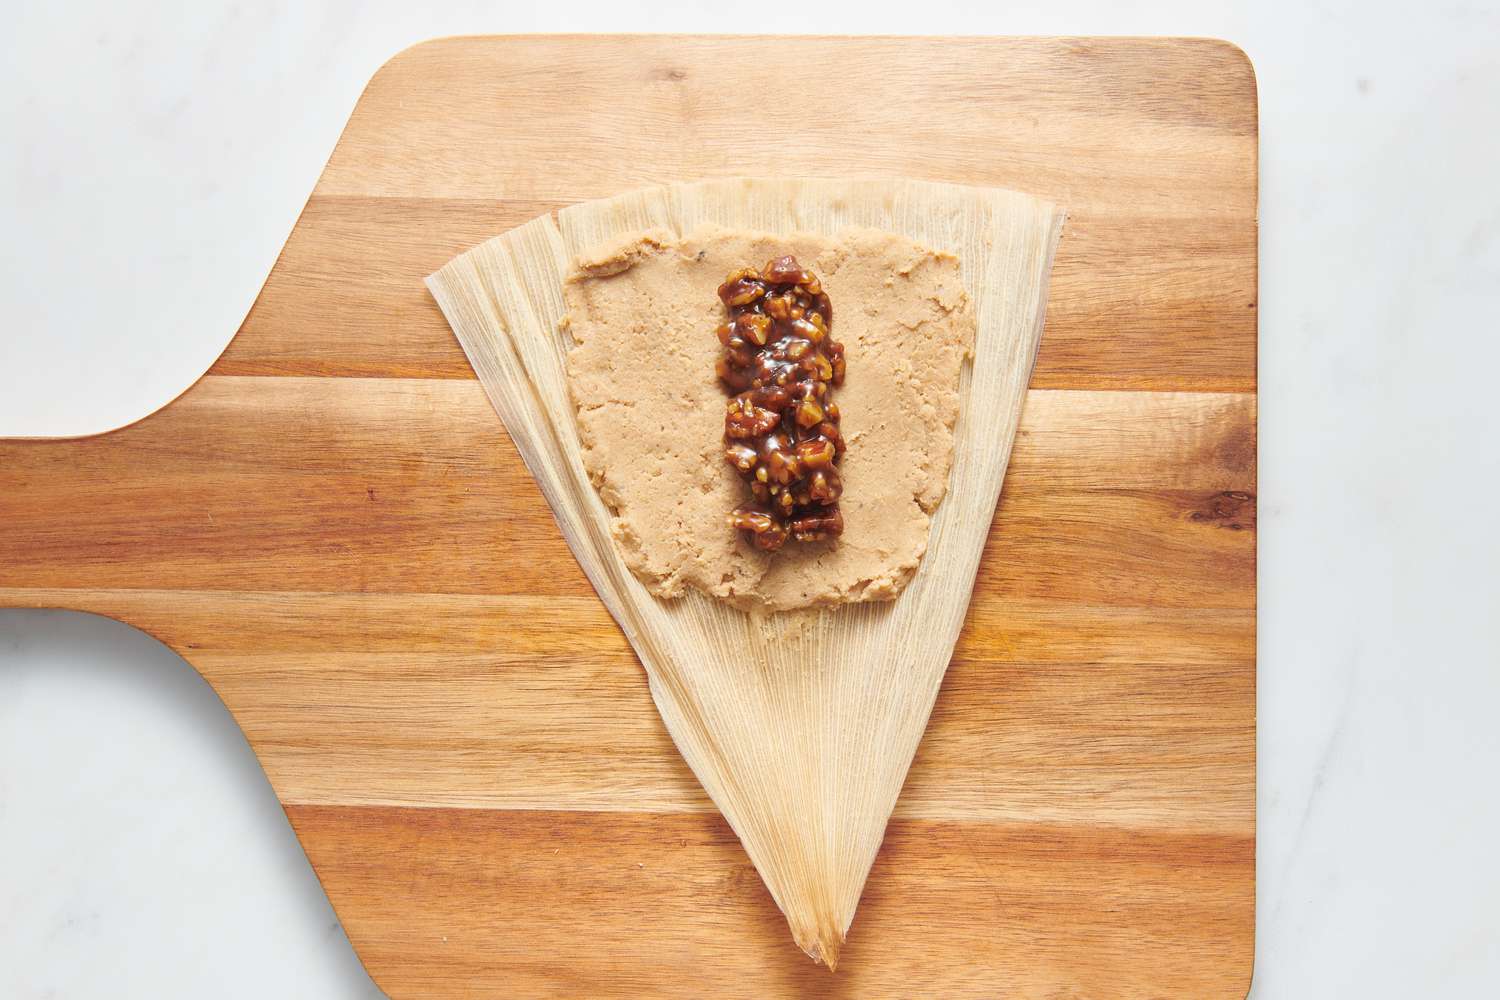 A cutting board with an open corn husk, with a small rectangle of masa harina dough towards the top, topped with a thin portion of pecan pie filling in the middle